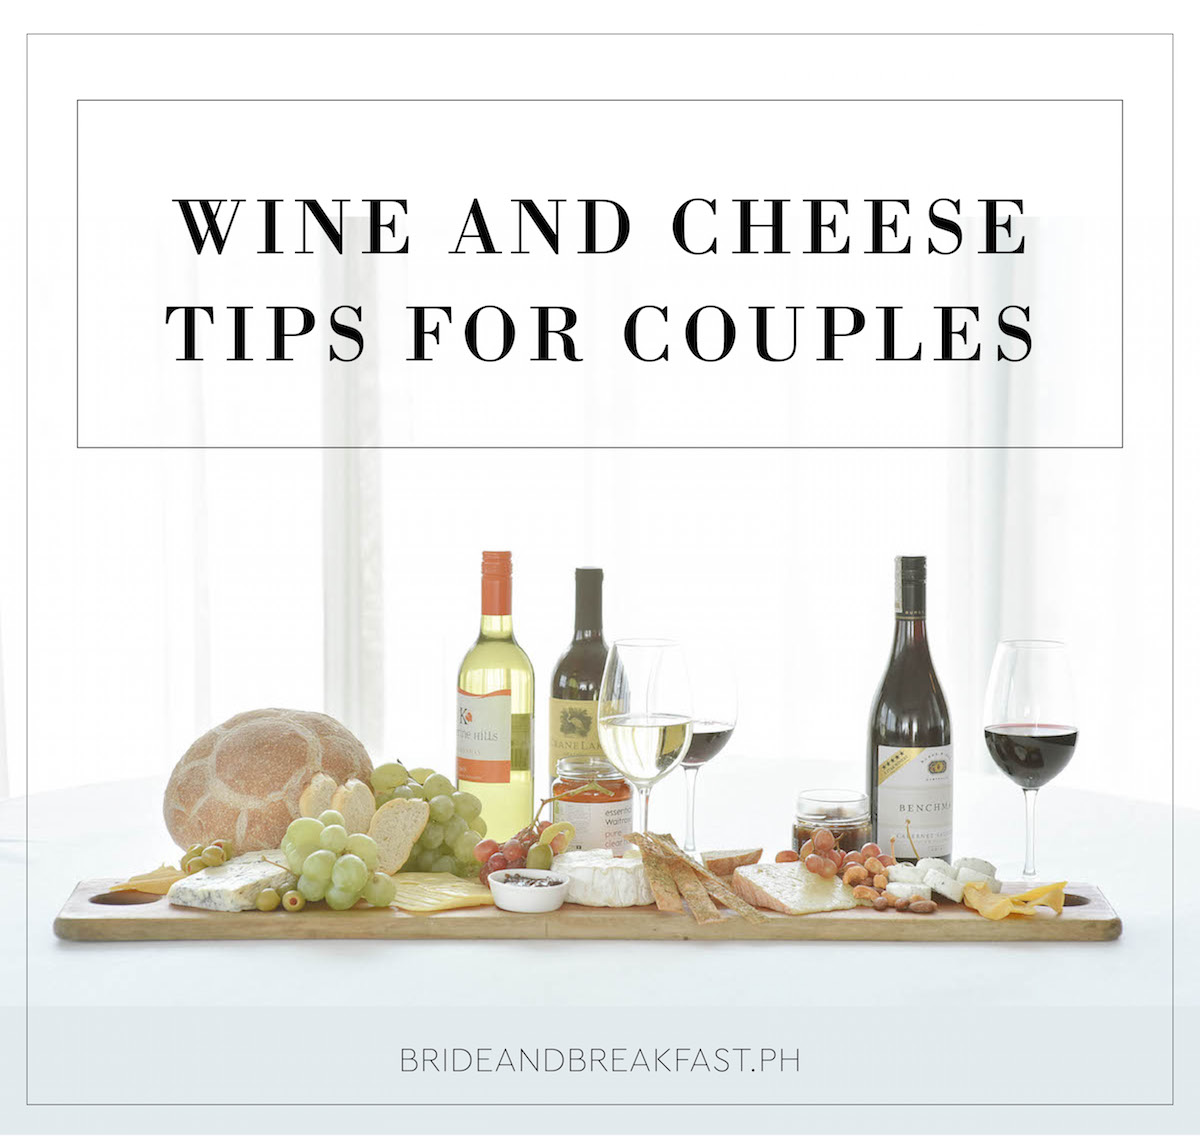 Wine and Cheese Tips for Couples